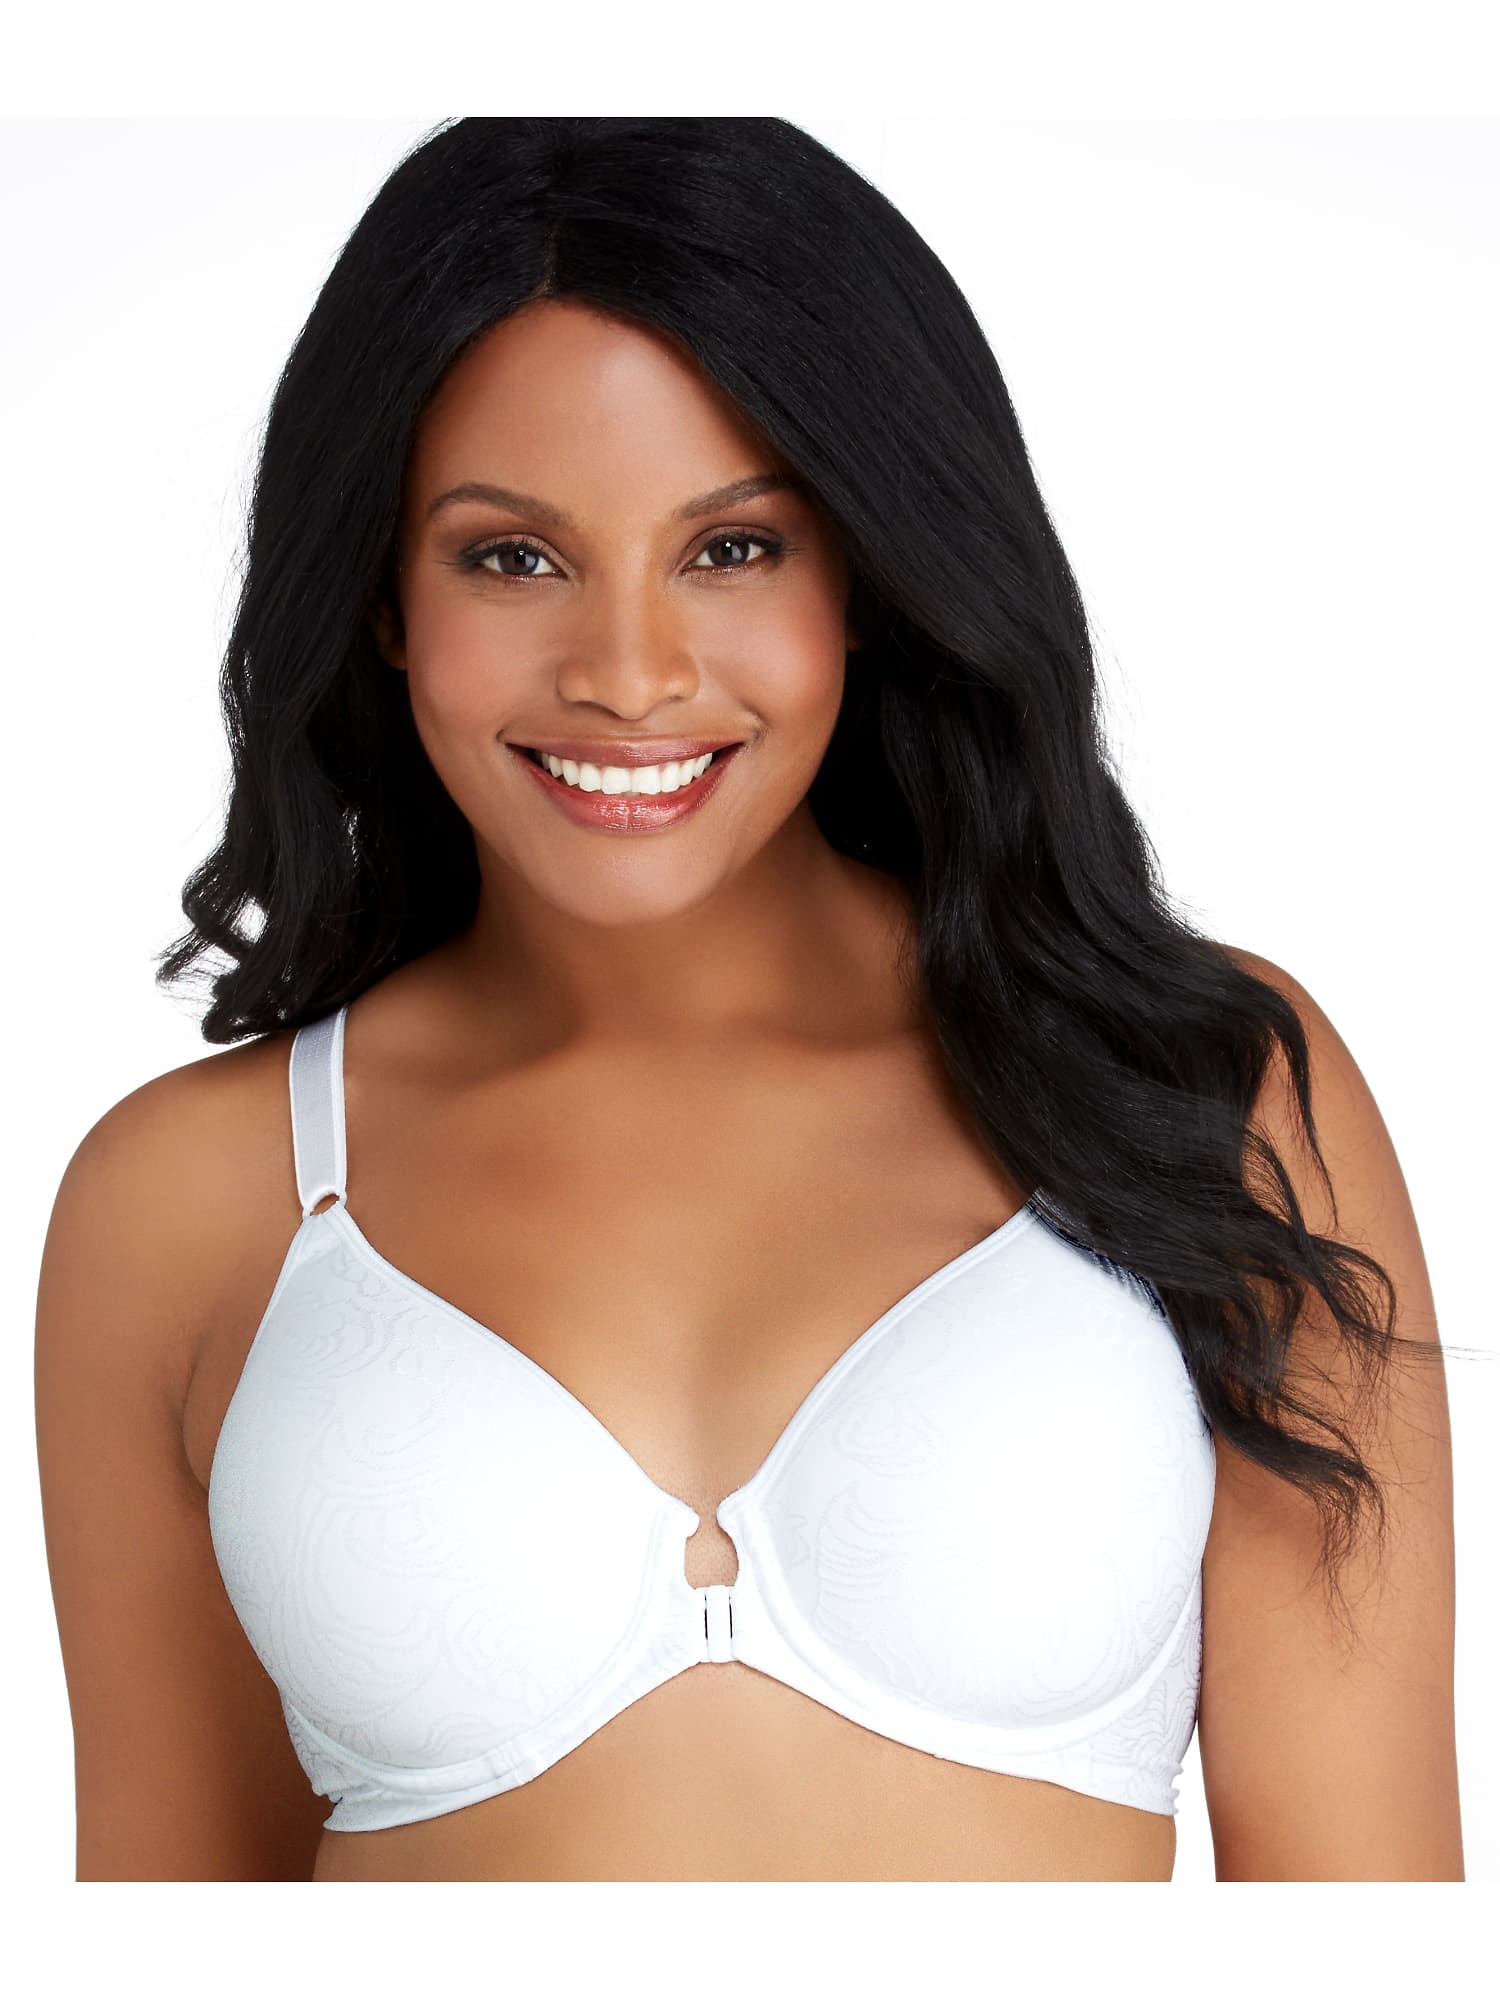 Bali Comfort Revolution® Front Close Shaping T-Shirt Underwire